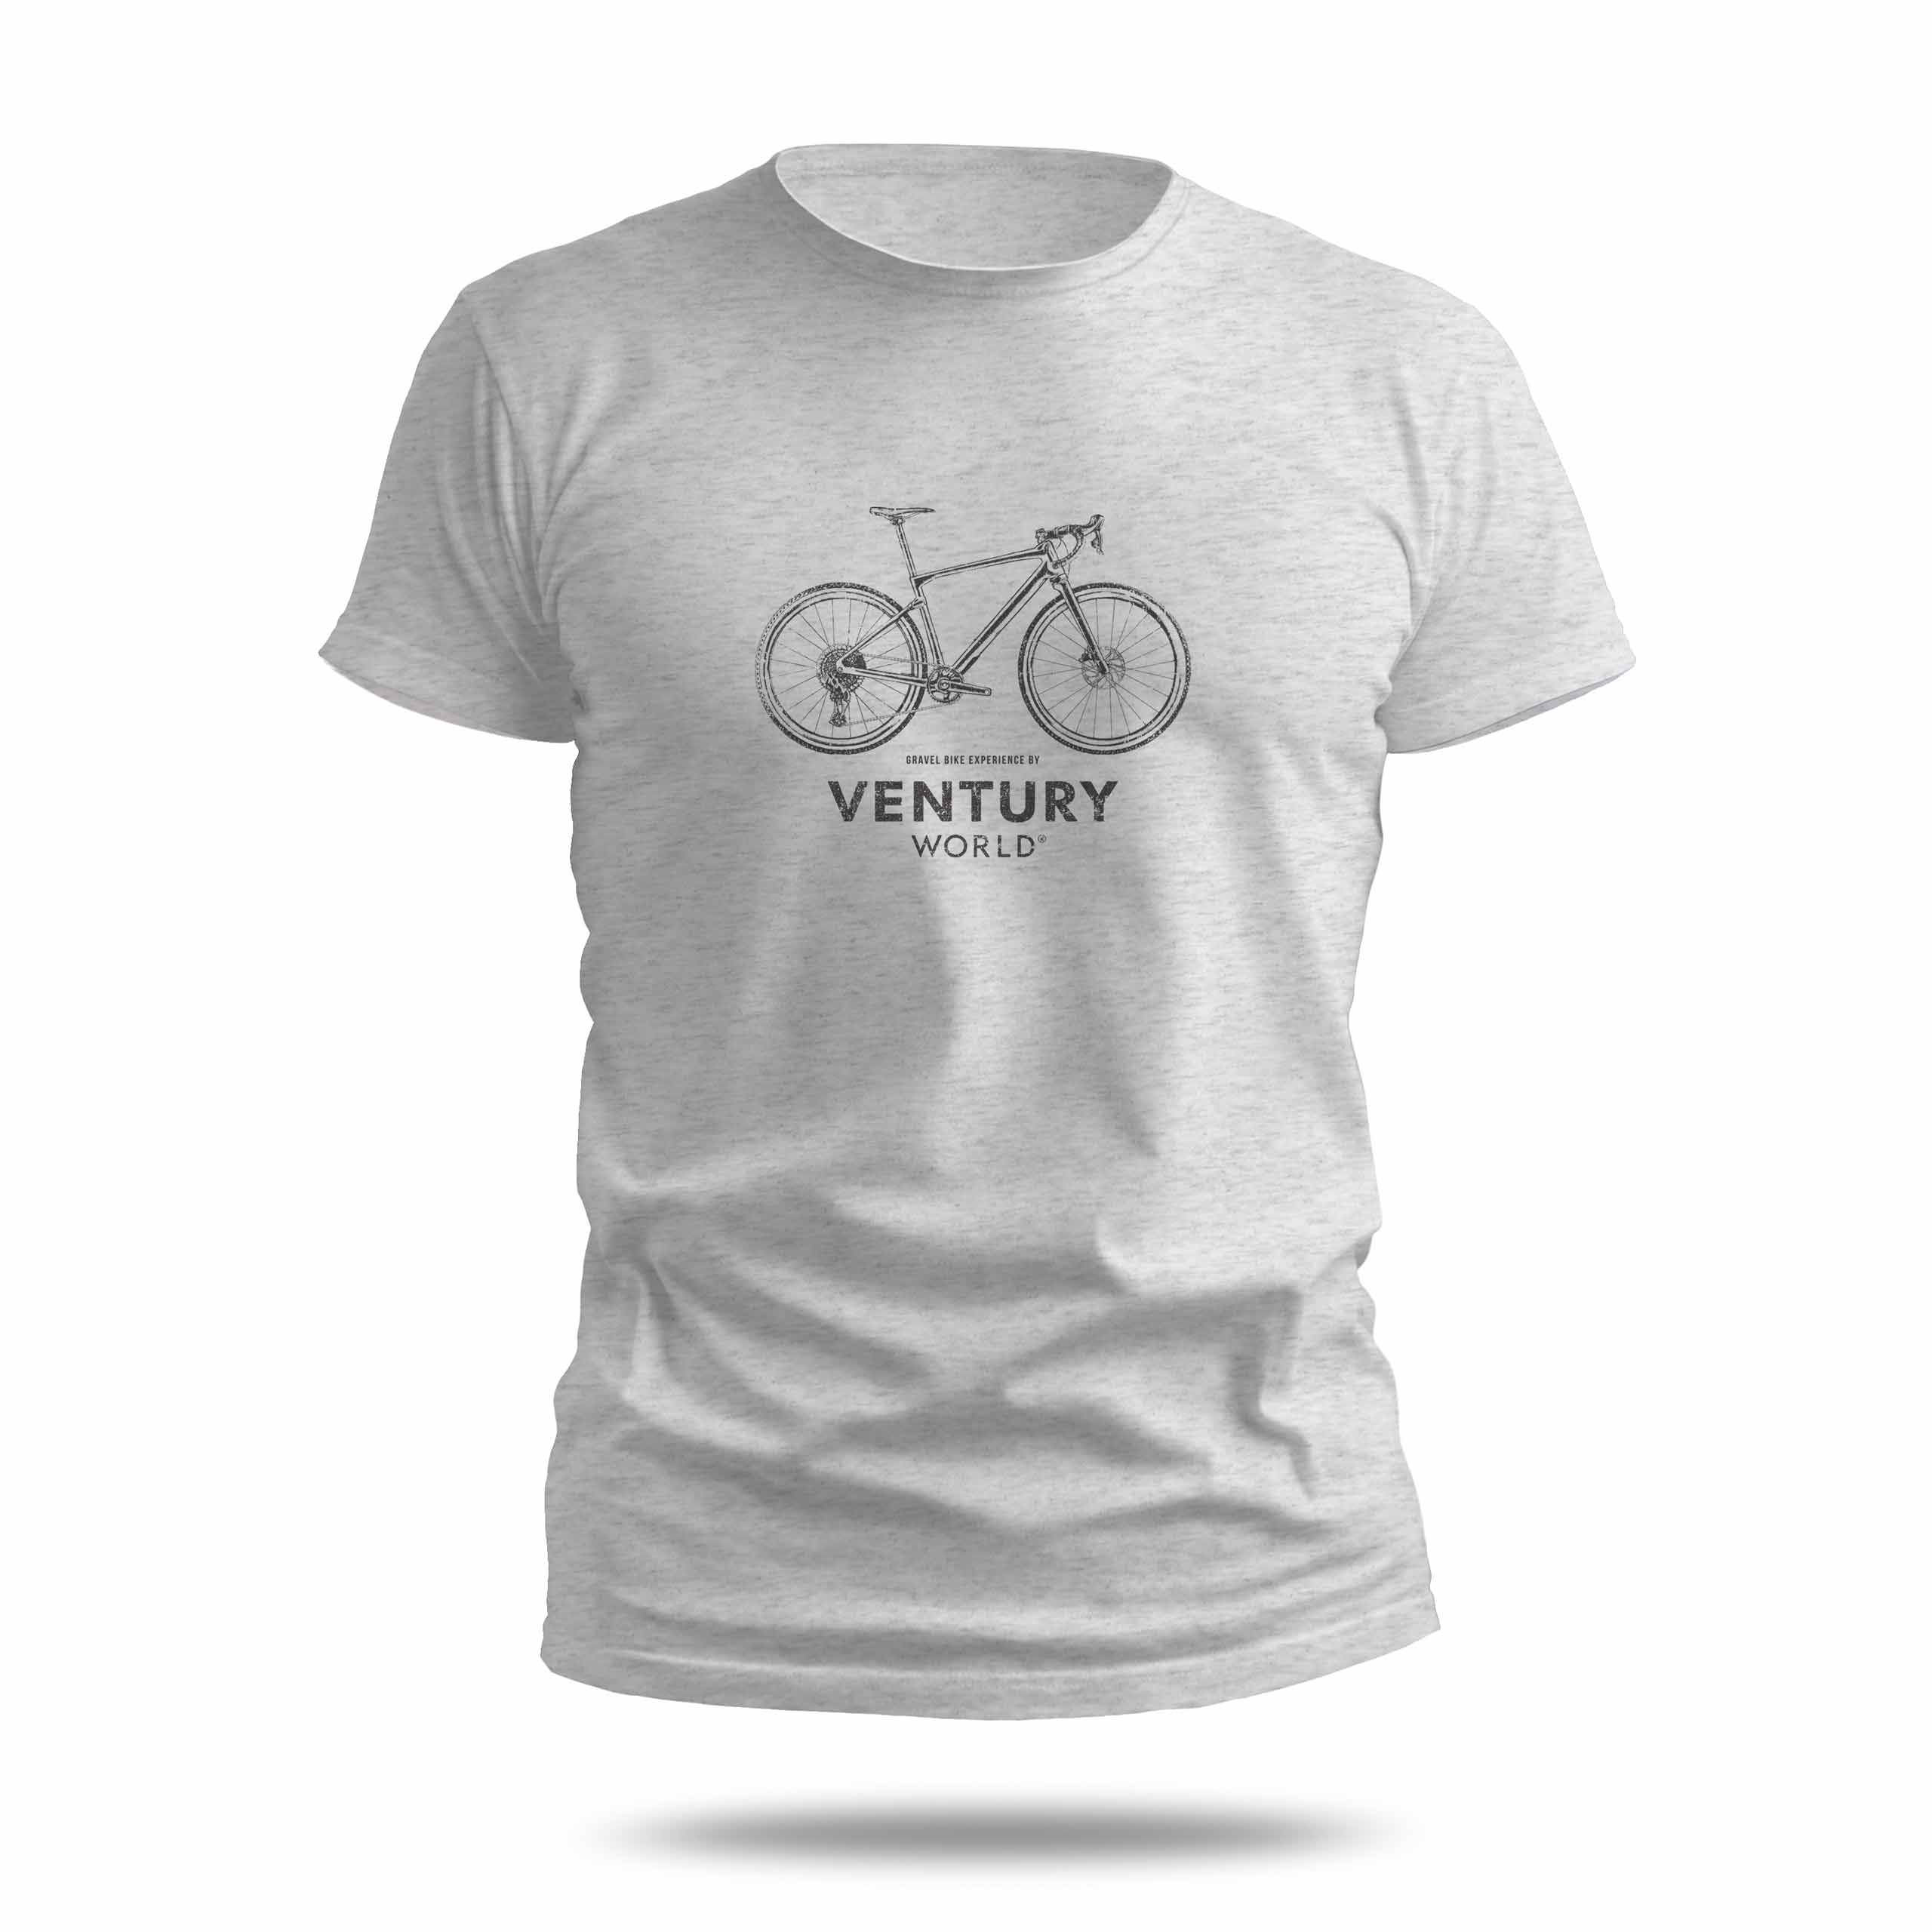 T-shirt cycling - Gravel Bike - ride on all the paths freely - collection Live Freely. T-shirt basic medium fit 100 % Naturel col rond.